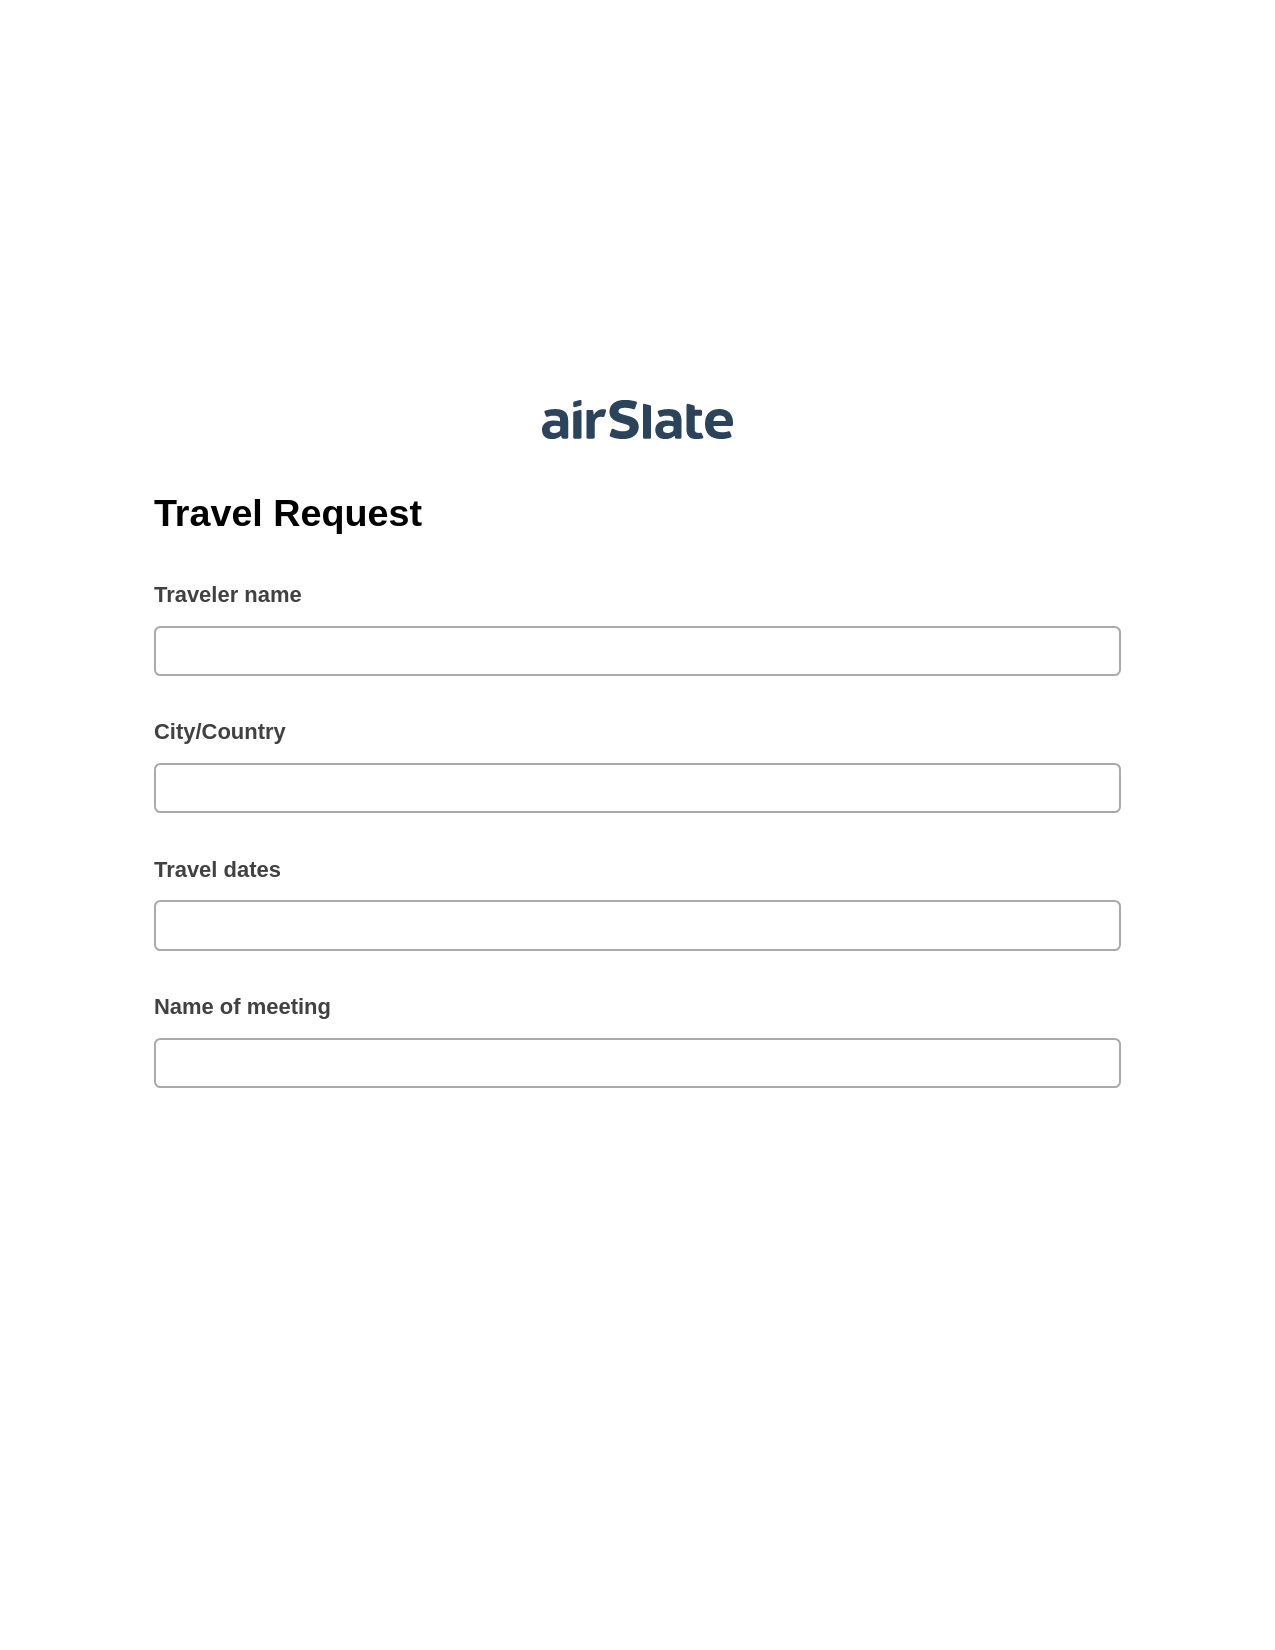 Travel Request Pre-fill Slate from MS Dynamics 365 Records Bot, Create NetSuite Records Bot, Dropbox Bot